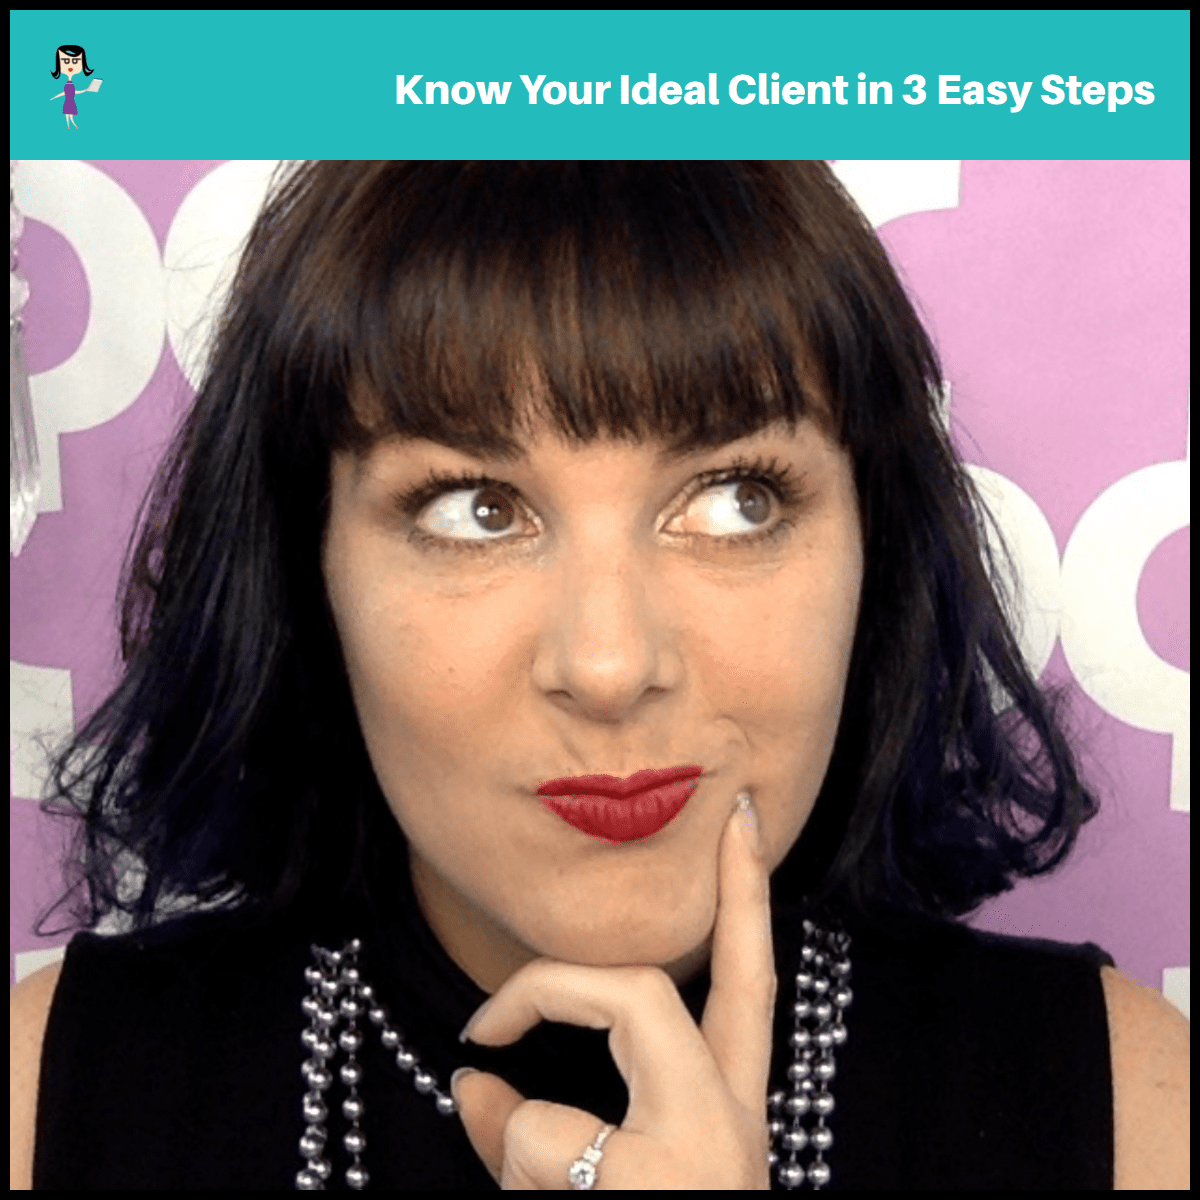 Know Your “Ideal Client” in 3 Easy Steps